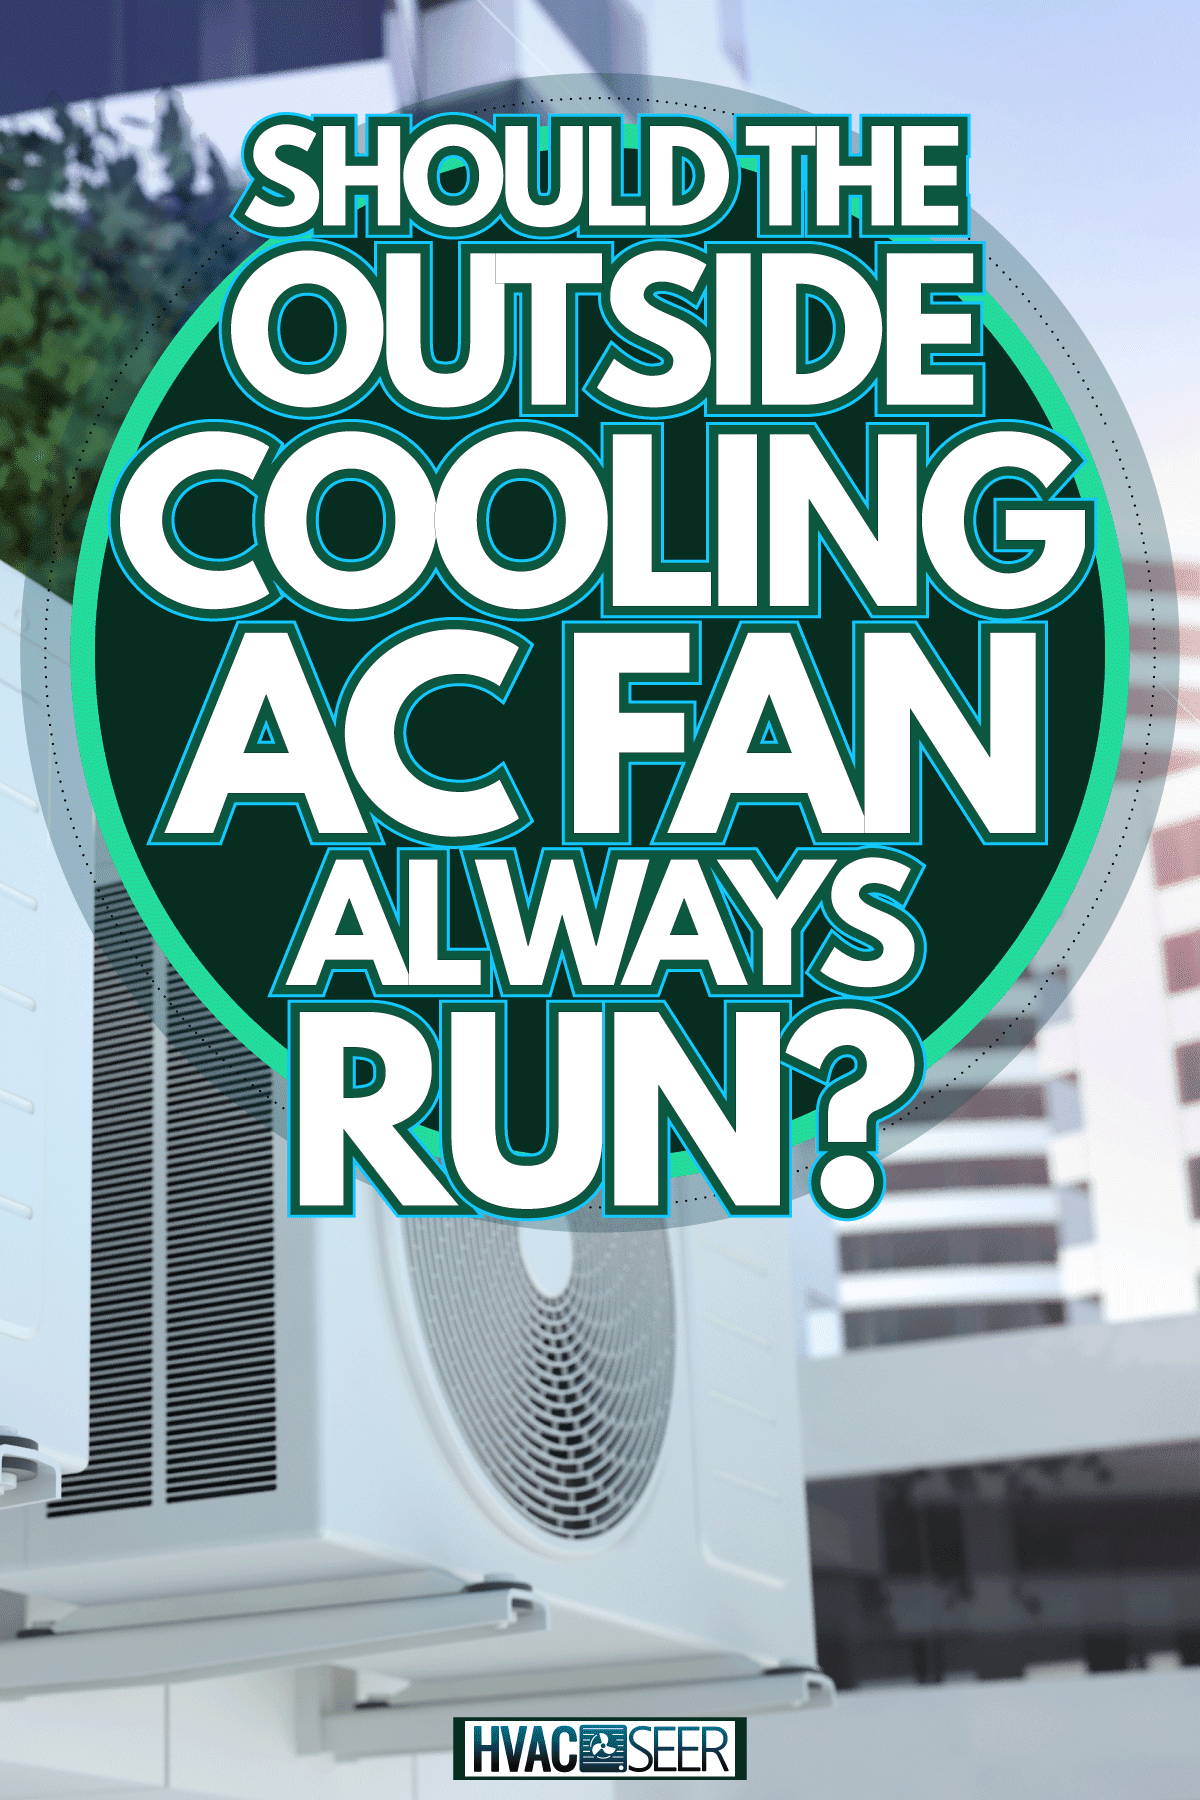 Warm Air from the outside component of AC Unit, Should the outside cooling AC Fan Always Run?